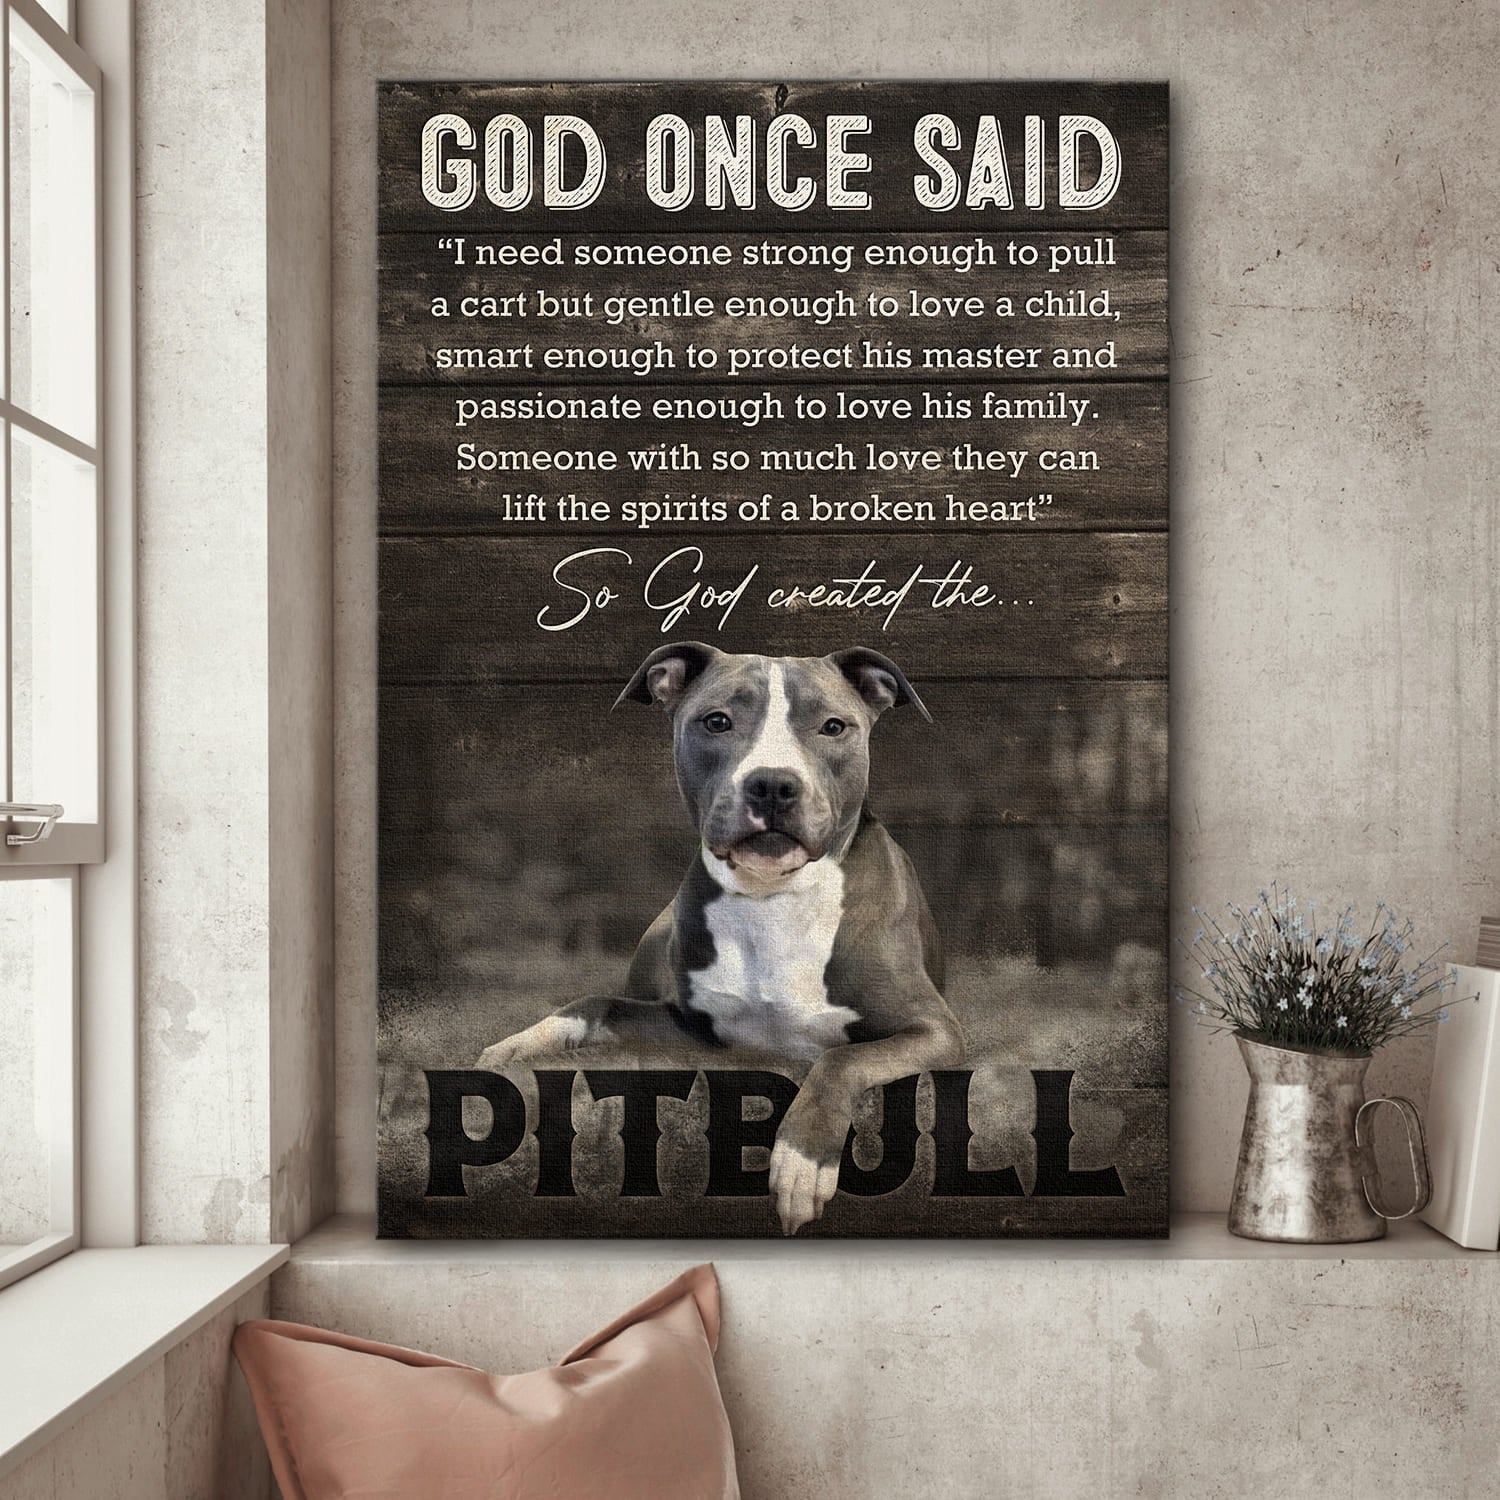 Pit Bull Portrait Canvas - Amazing Pit Bull Portrait Canvas - Gift For Pit Bull Lover -  God once said